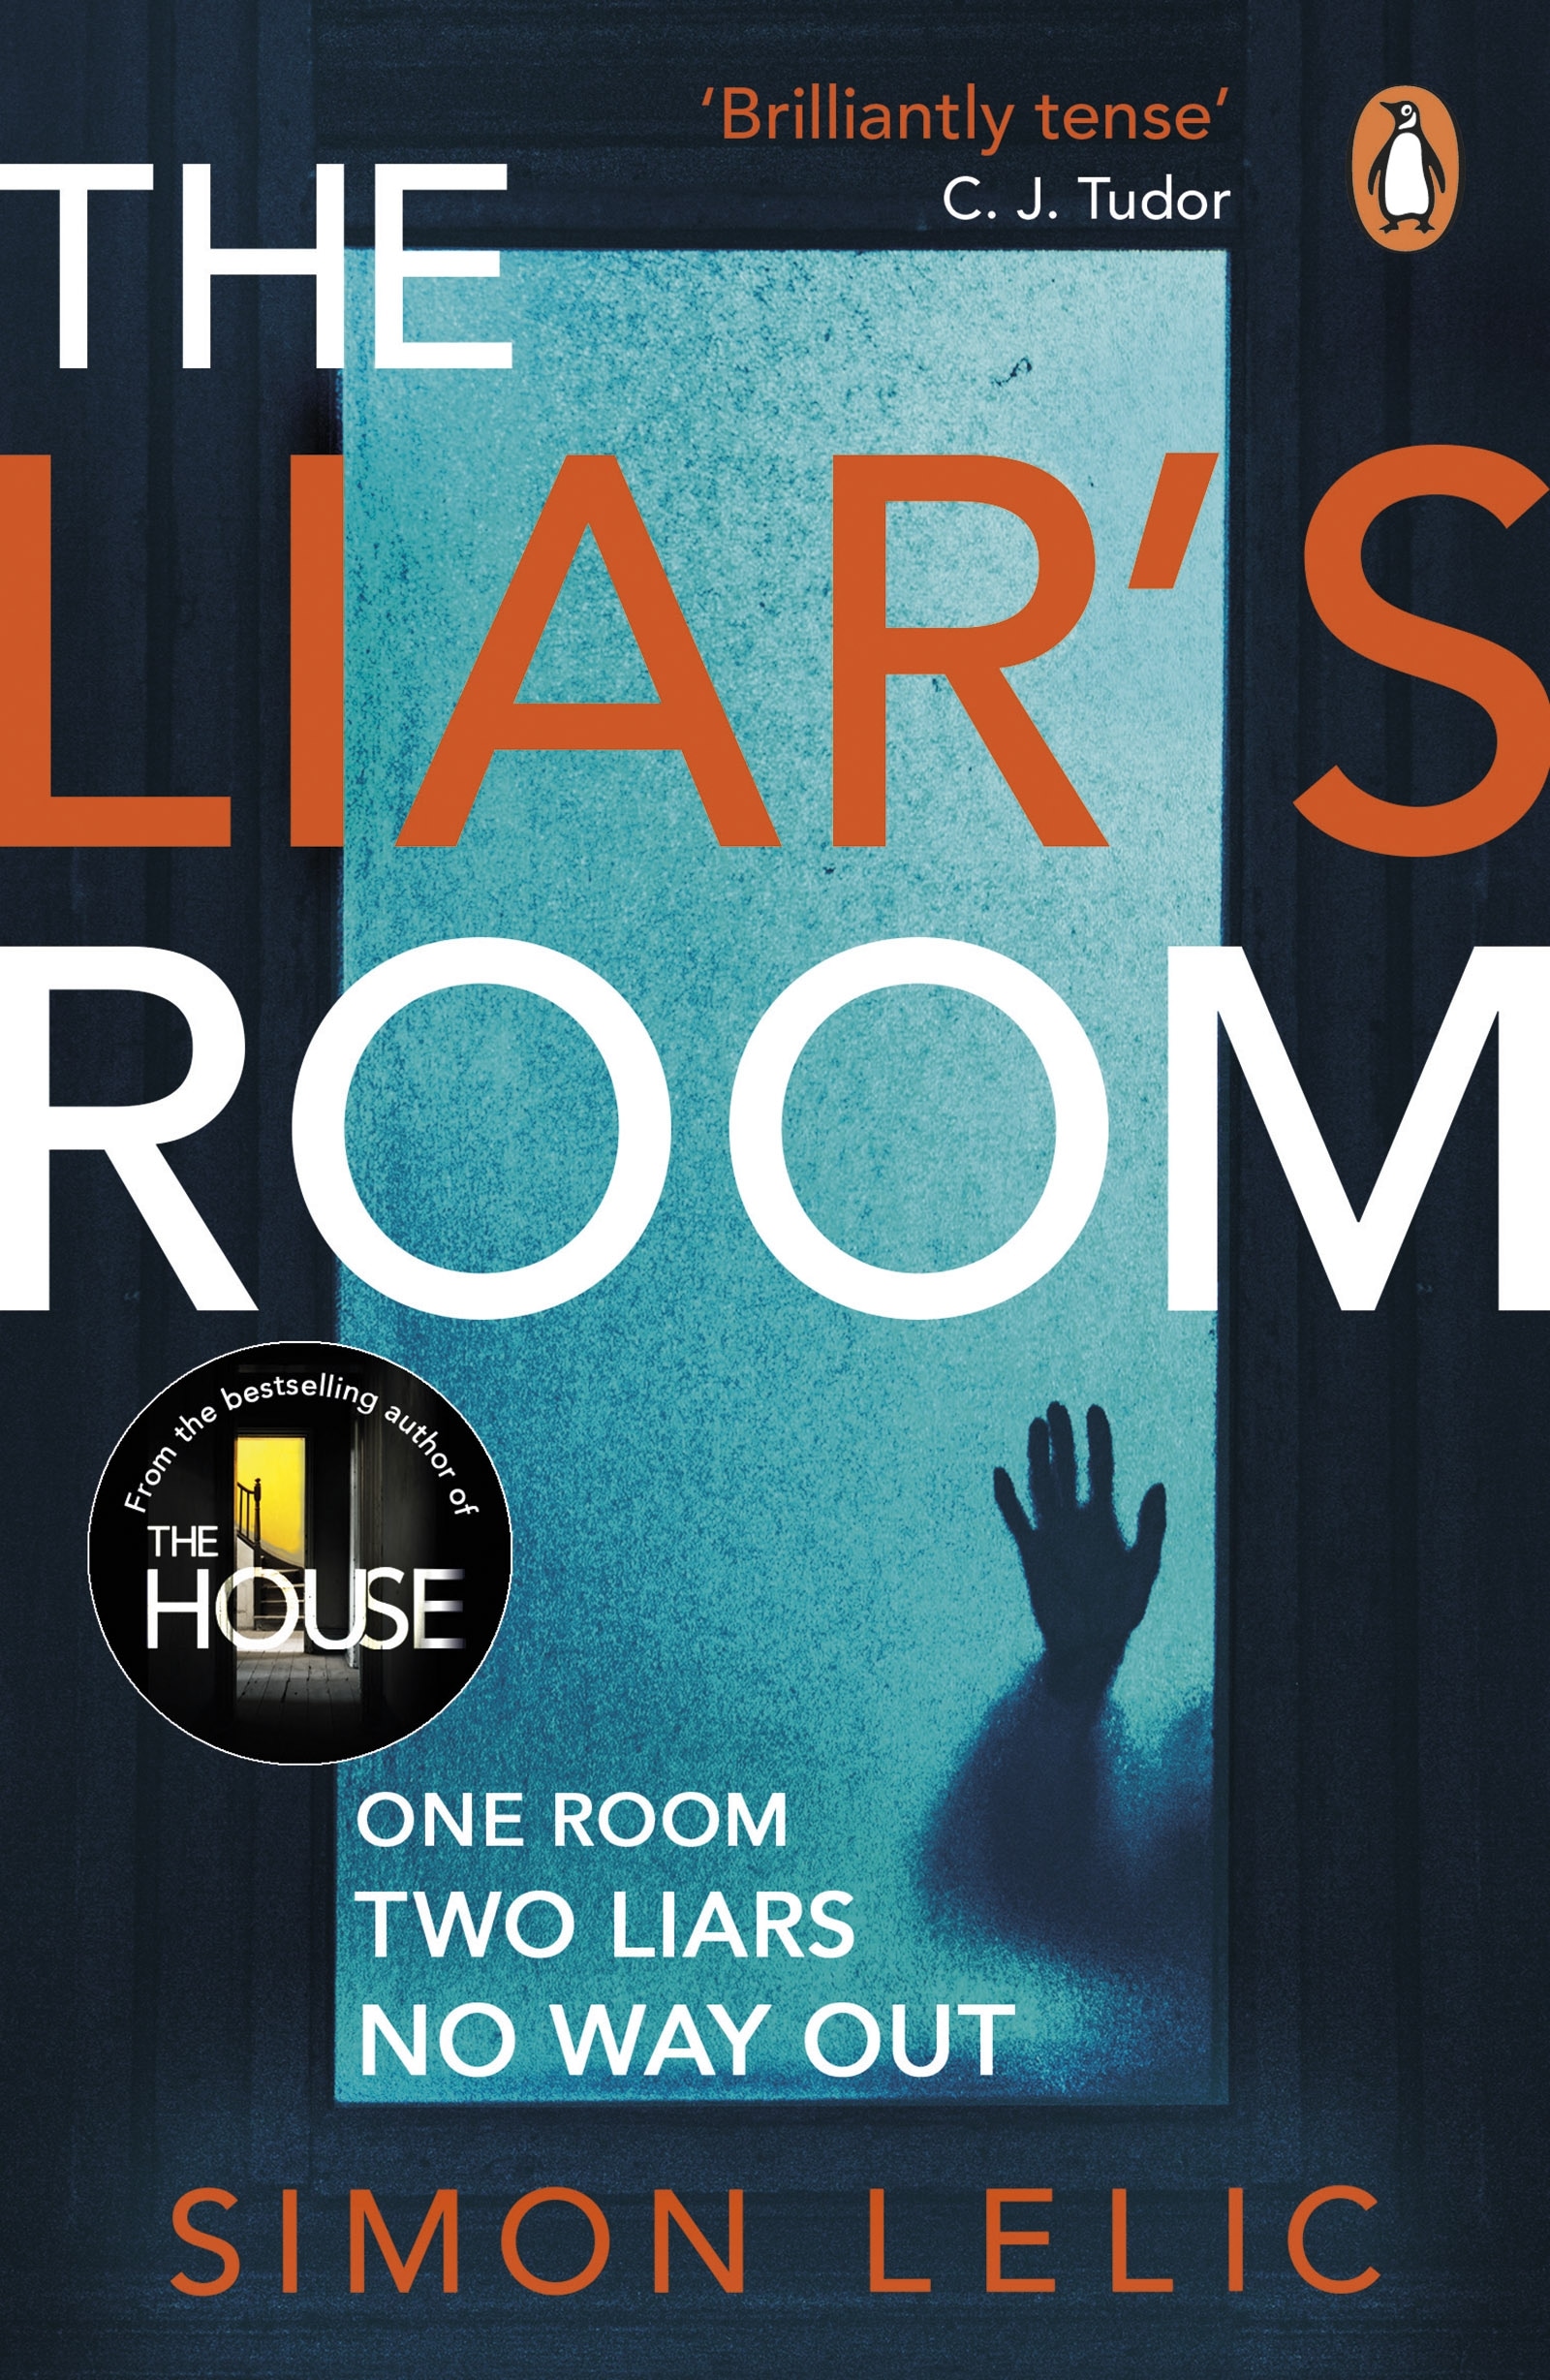 Book “The Liar's Room” by Simon Lelic — August 9, 2018